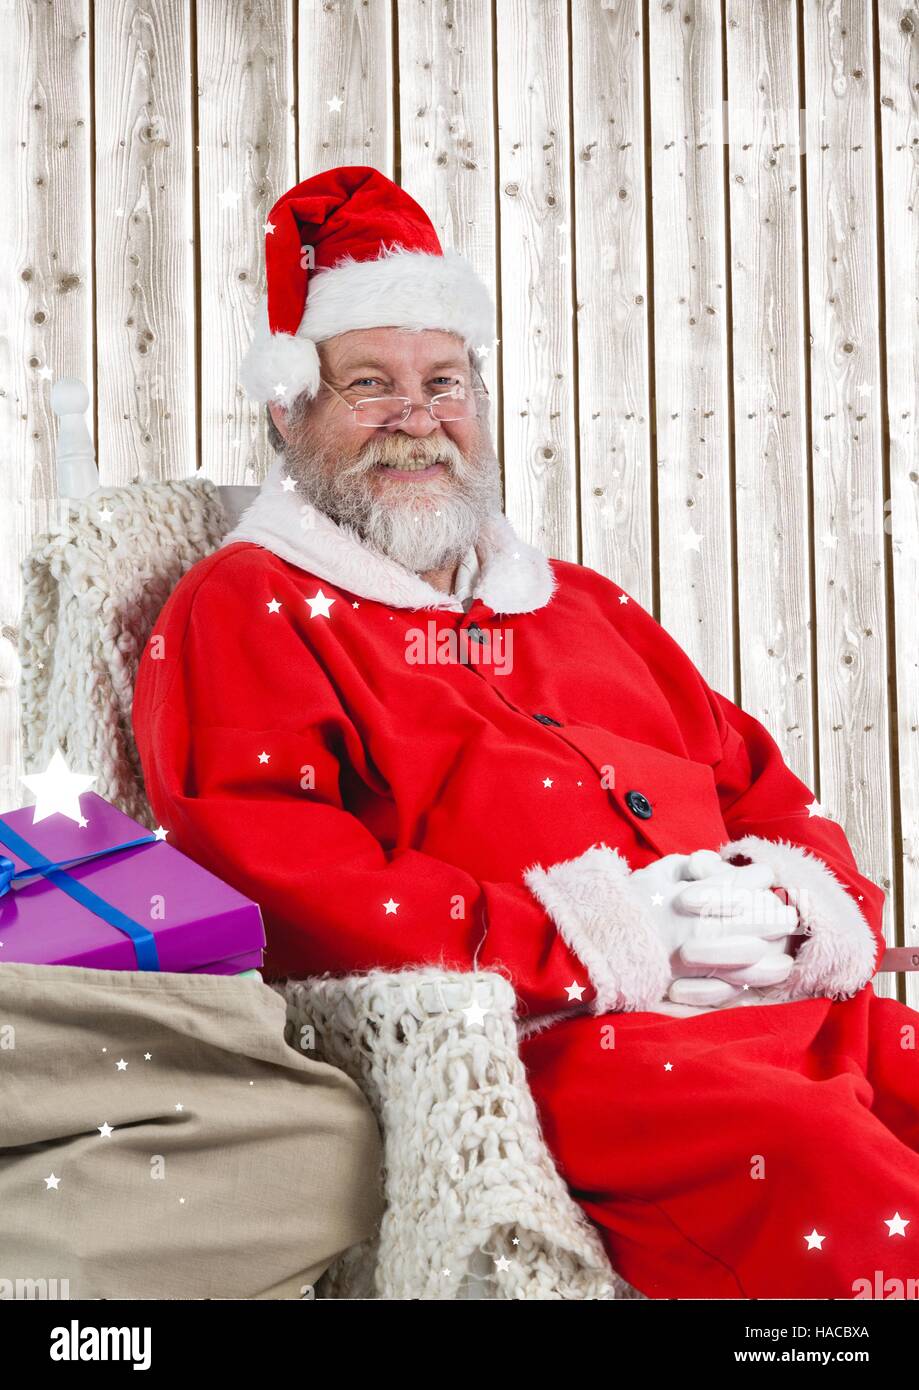 Happy santa sitting on chair with gifts Stock Photo